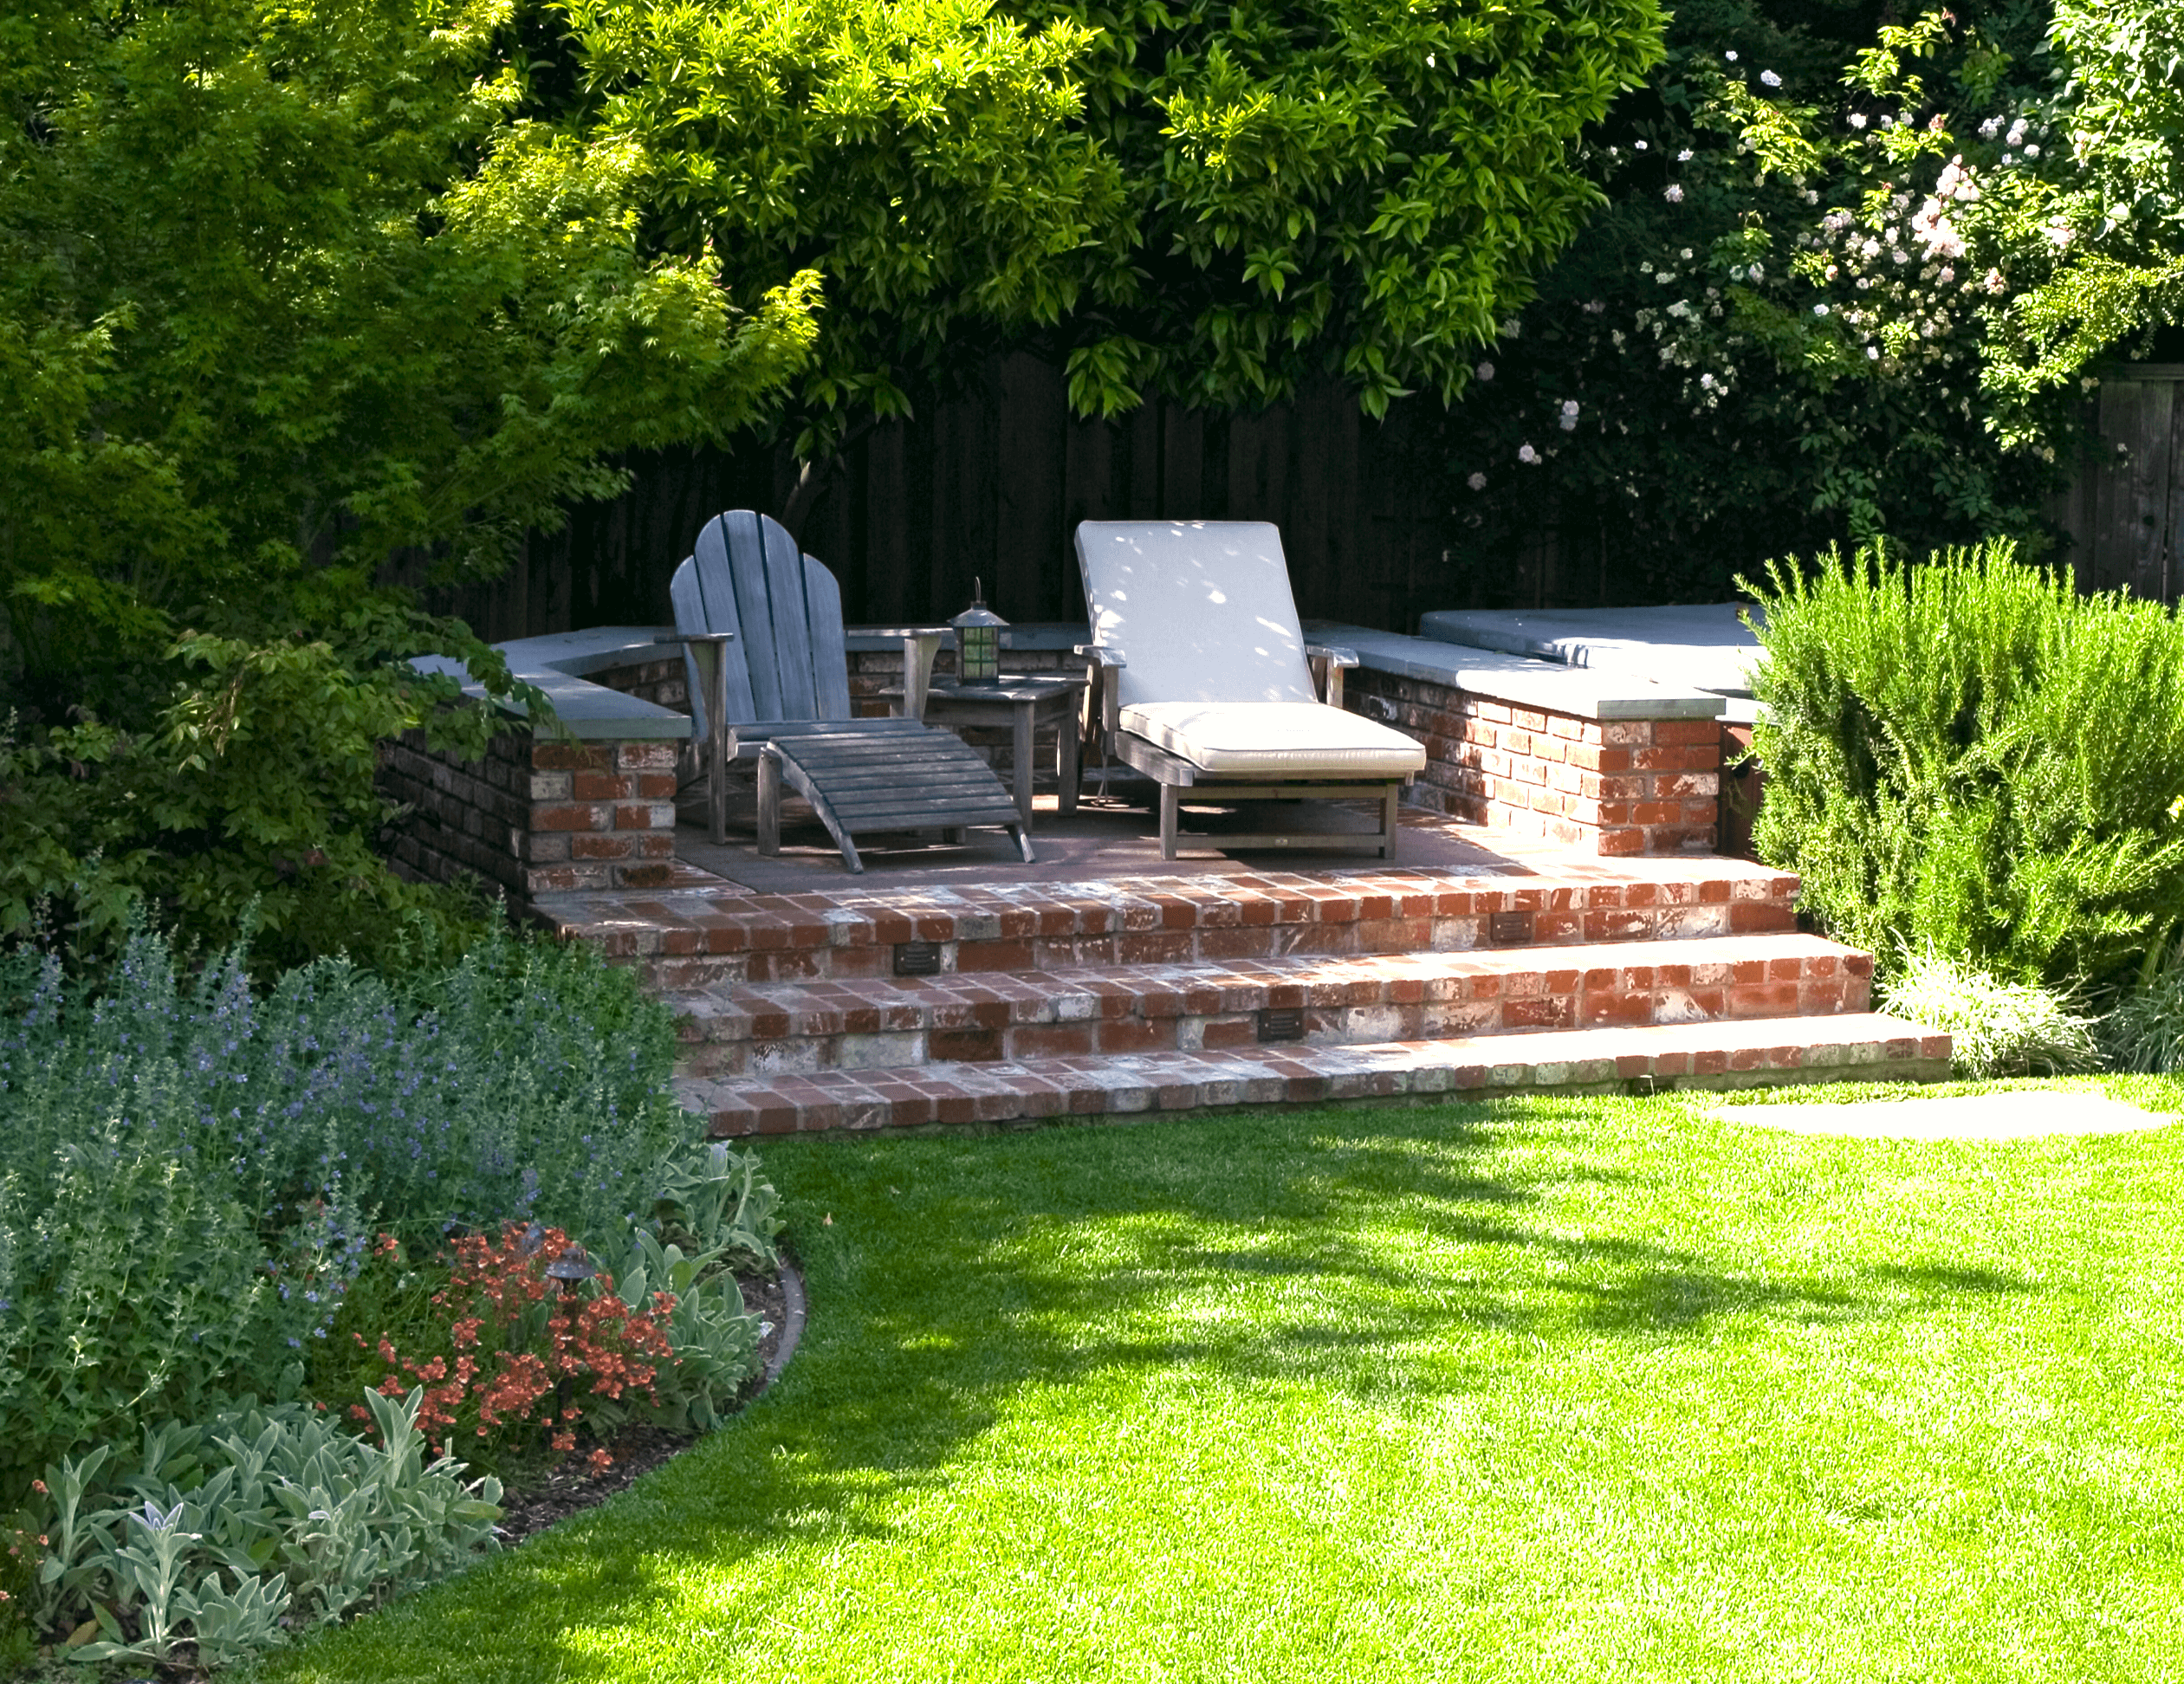 Raised brock patio under trees with lounge chairs and overview of lawn